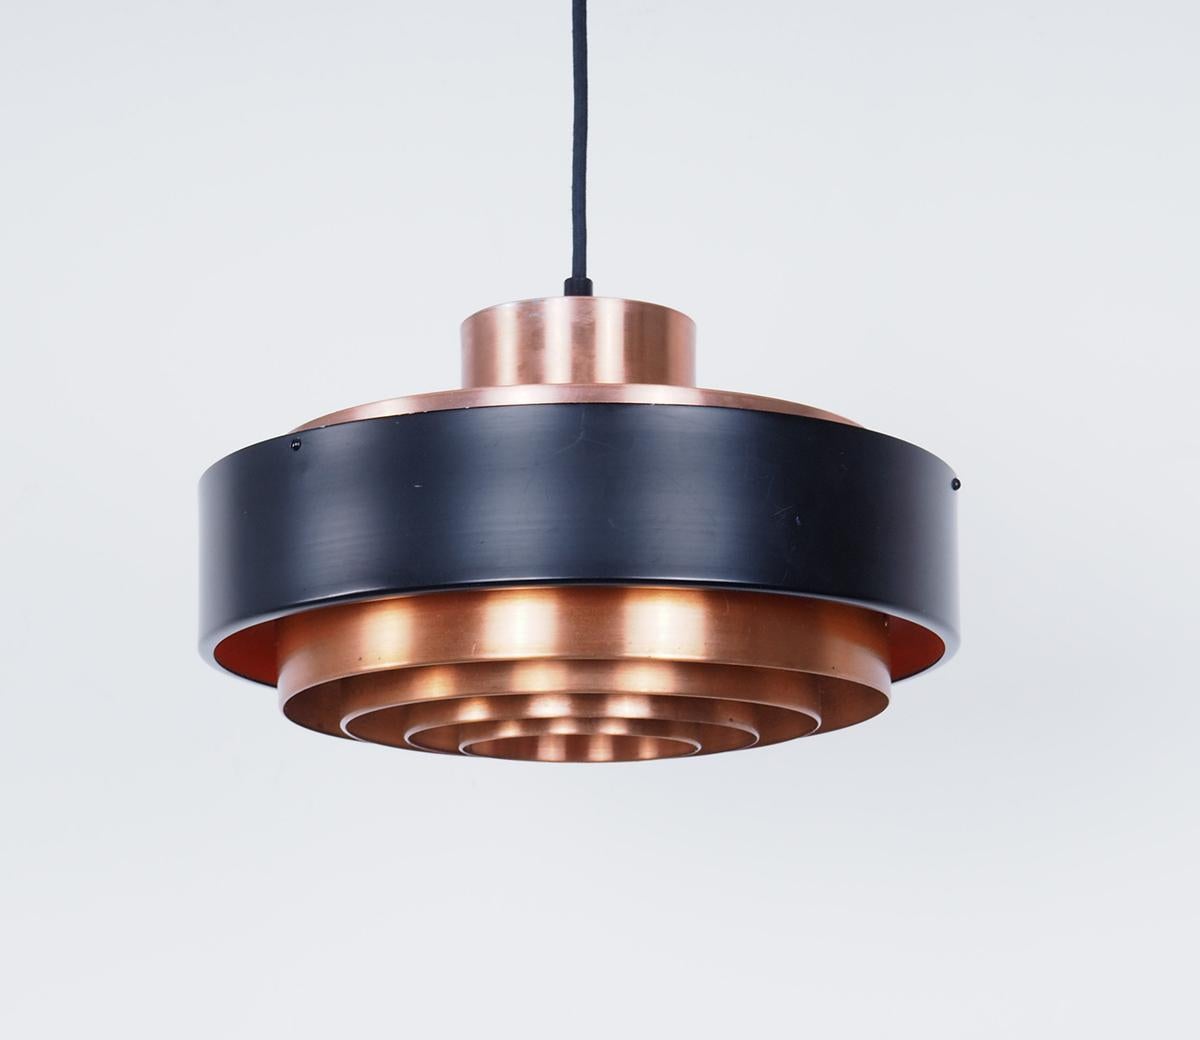 Vintage hanging lamp made of copper produced in Denmark in the 1960s.

The model looks a bit like Fog & Morup lamps.

The lamp has several layers of copper and a thick black band which spreads the light nicely.

The inside of the copper is lacquered